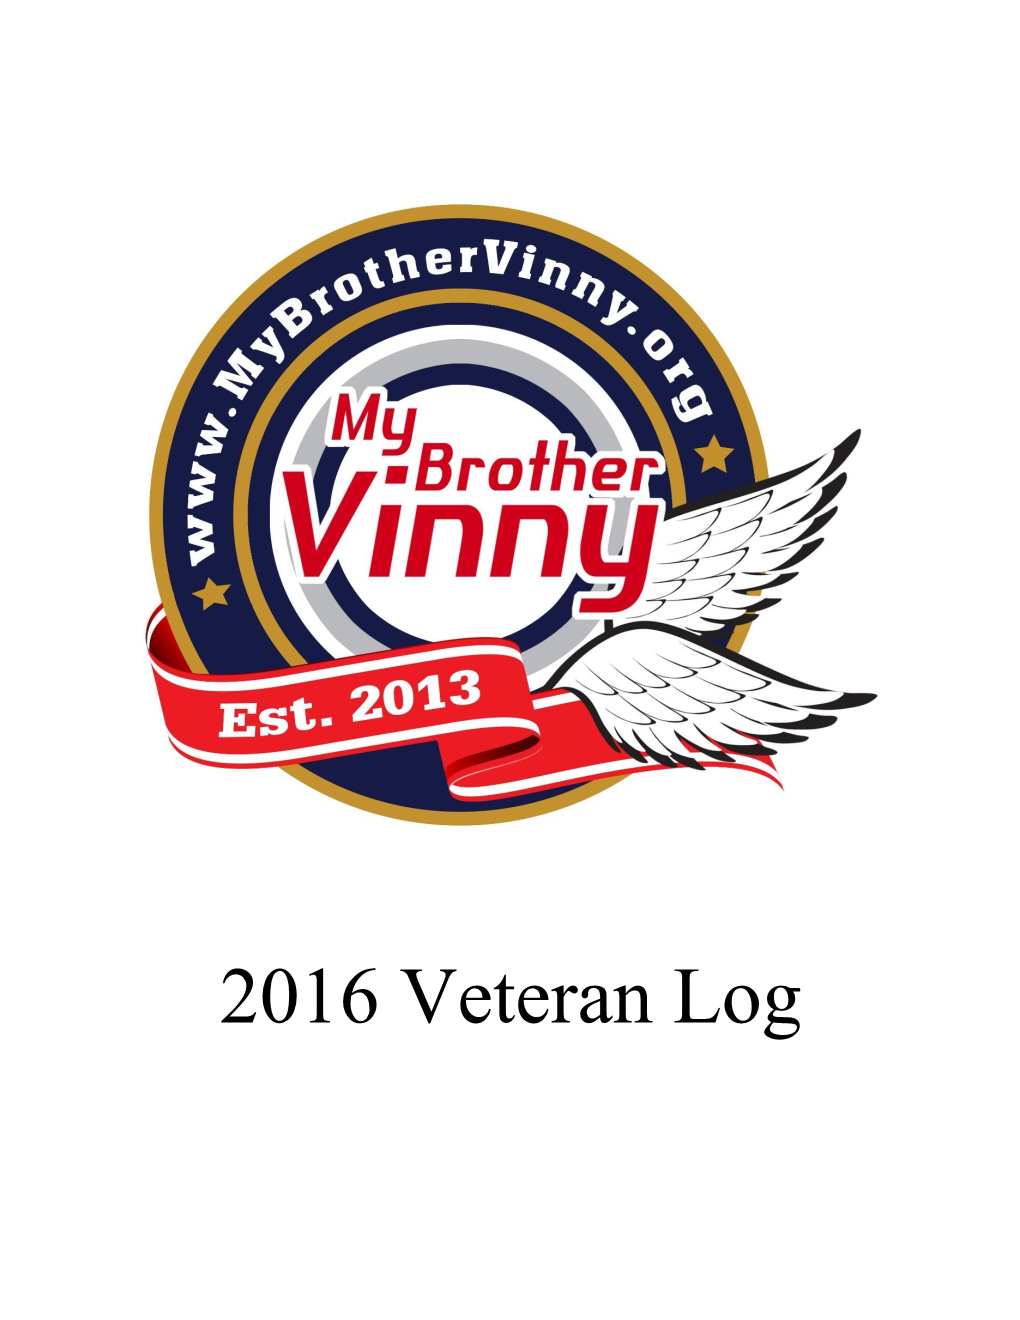 Check out Our 2016 Veteran Log